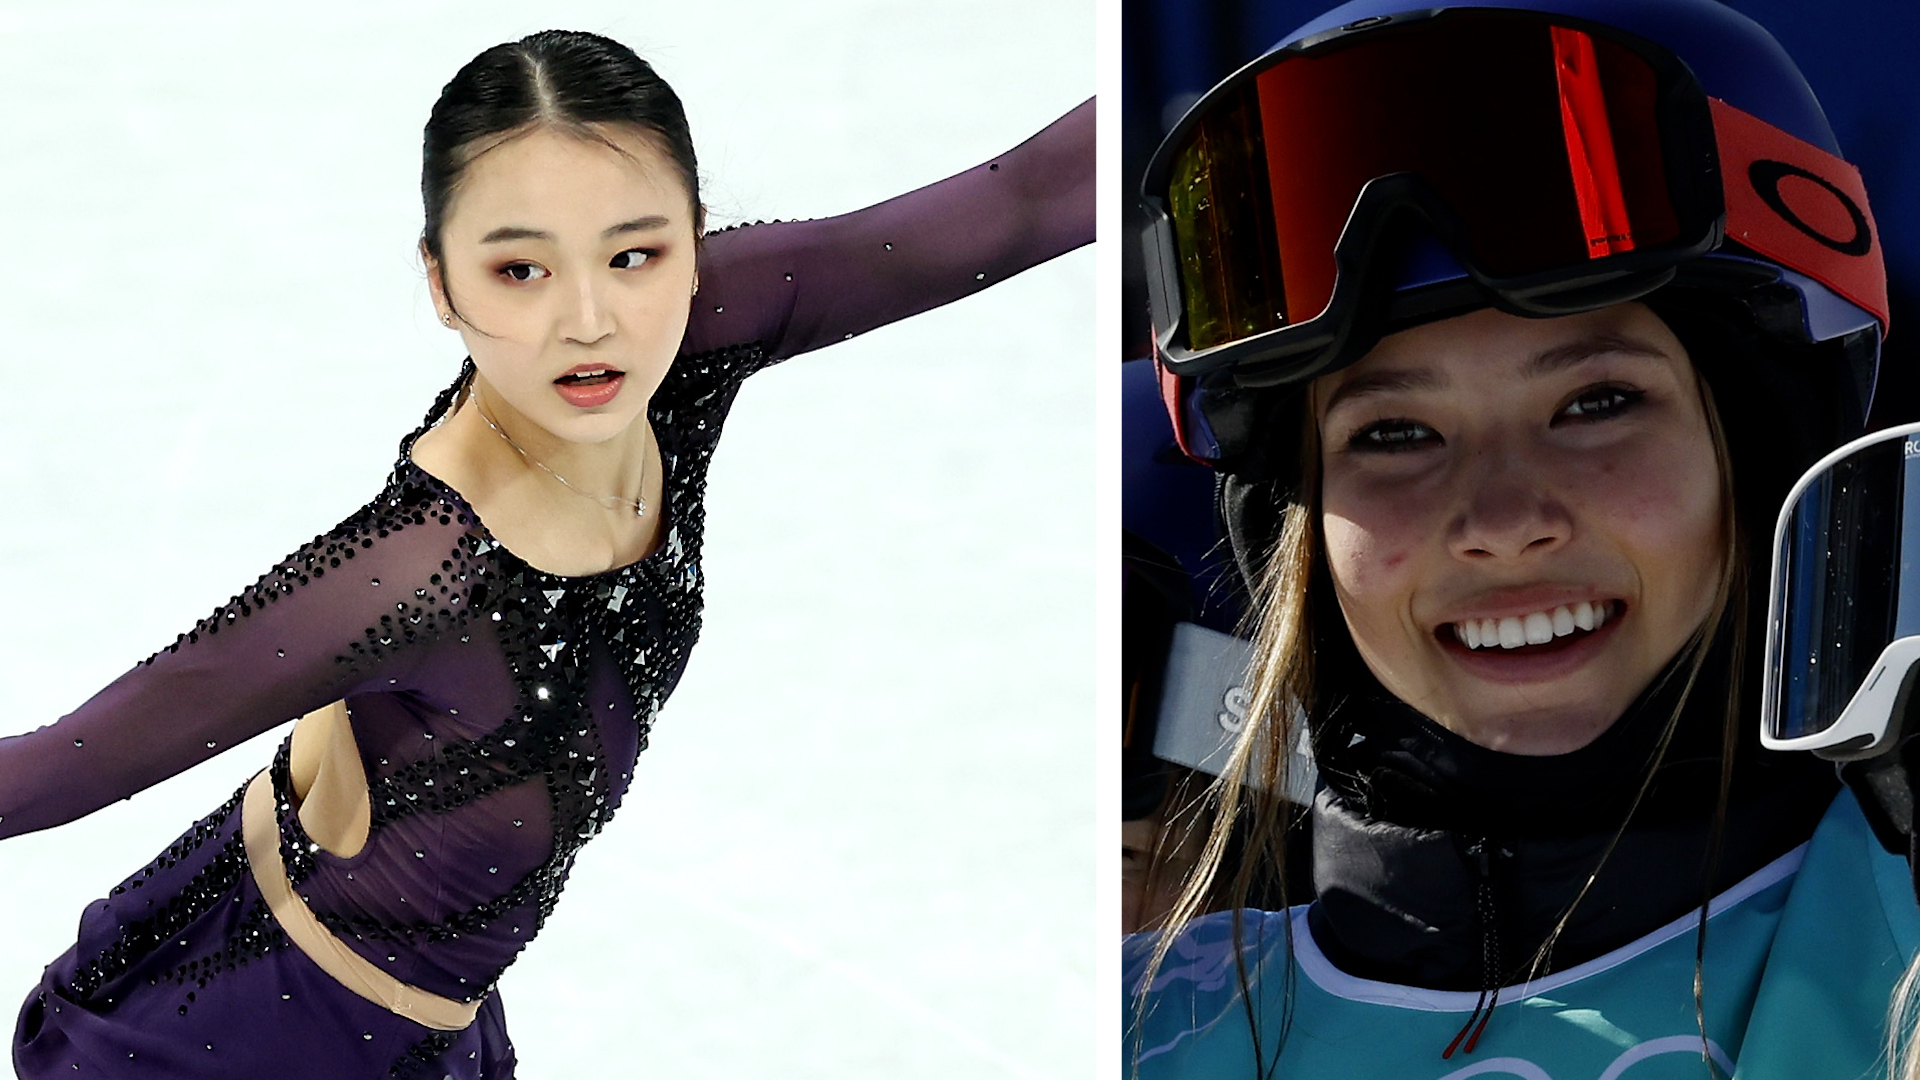 Is Winter Olympics star Eileen Gu Chinese or American? Let people be both,  says Beijing researcher